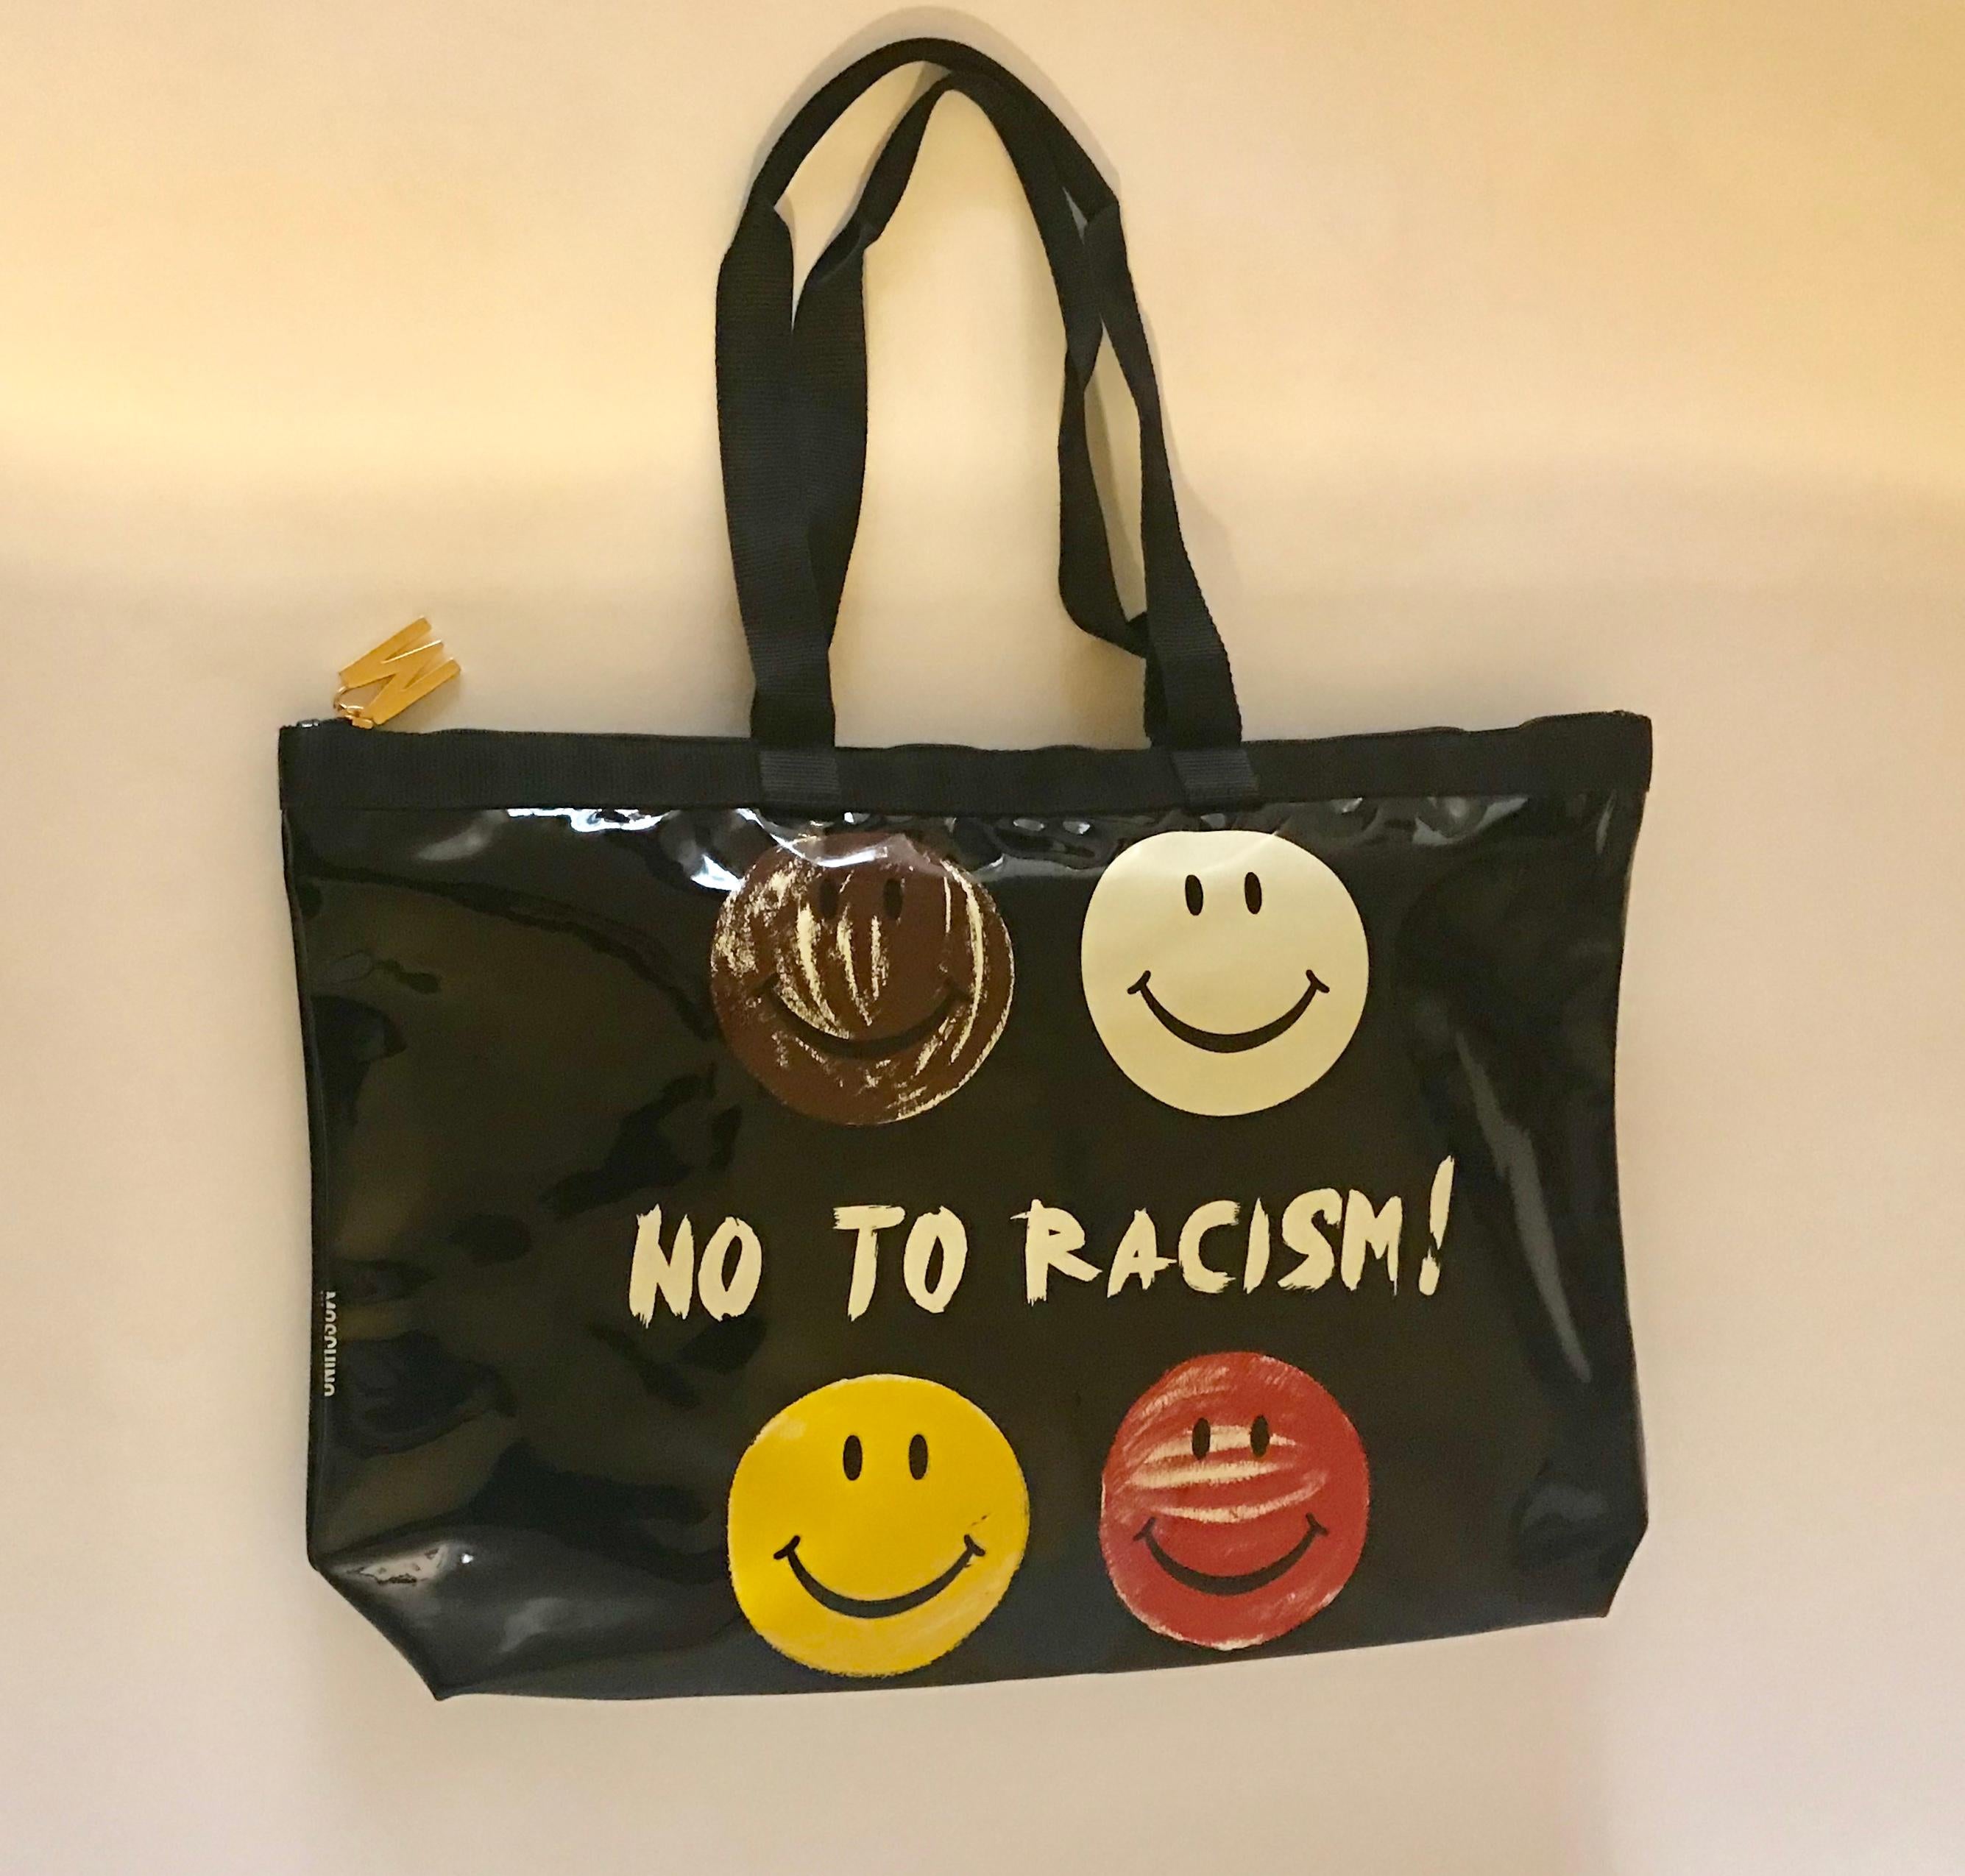 Vintage Moschino by Redwall tote bag in a black patent leather like material (possibly synthetic) featuring multi-colored smiley faces and the slogan 'No To Racism.' Grosgrain trim and handles. M logo at zip top. Signed Moschino at side and Moschino